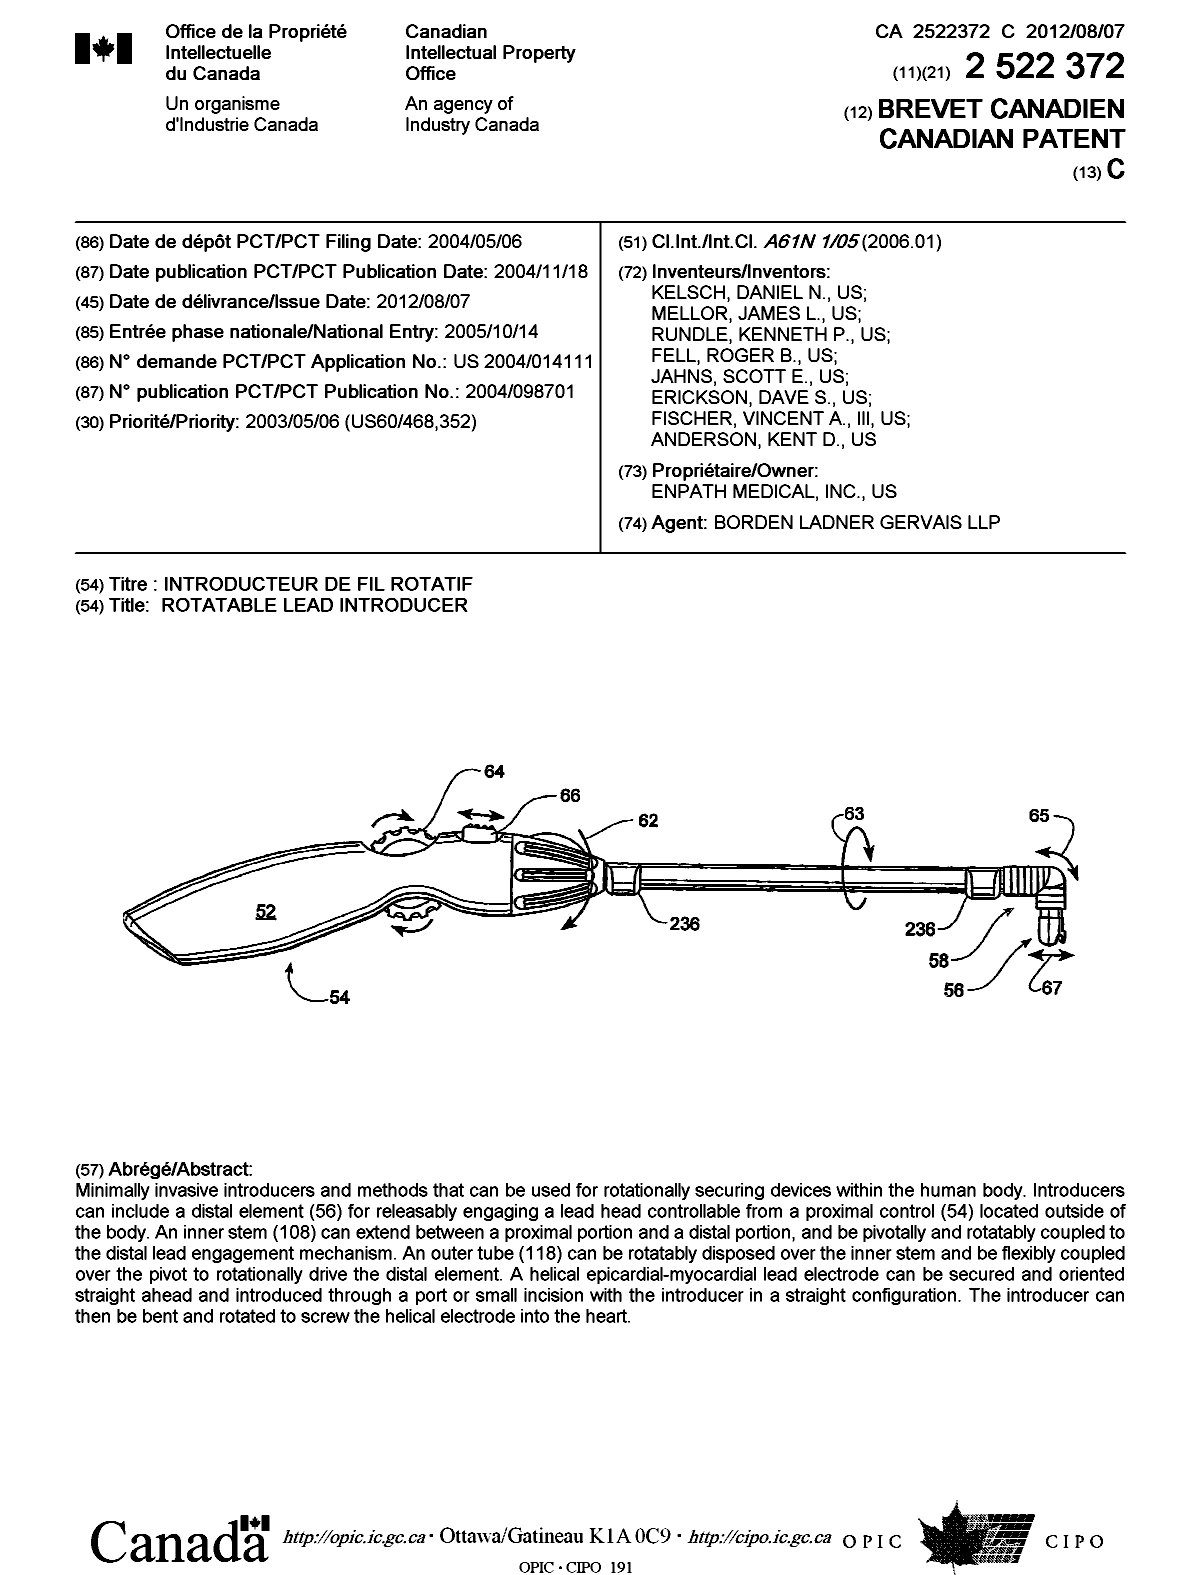 Canadian Patent Document 2522372. Cover Page 20120712. Image 1 of 1